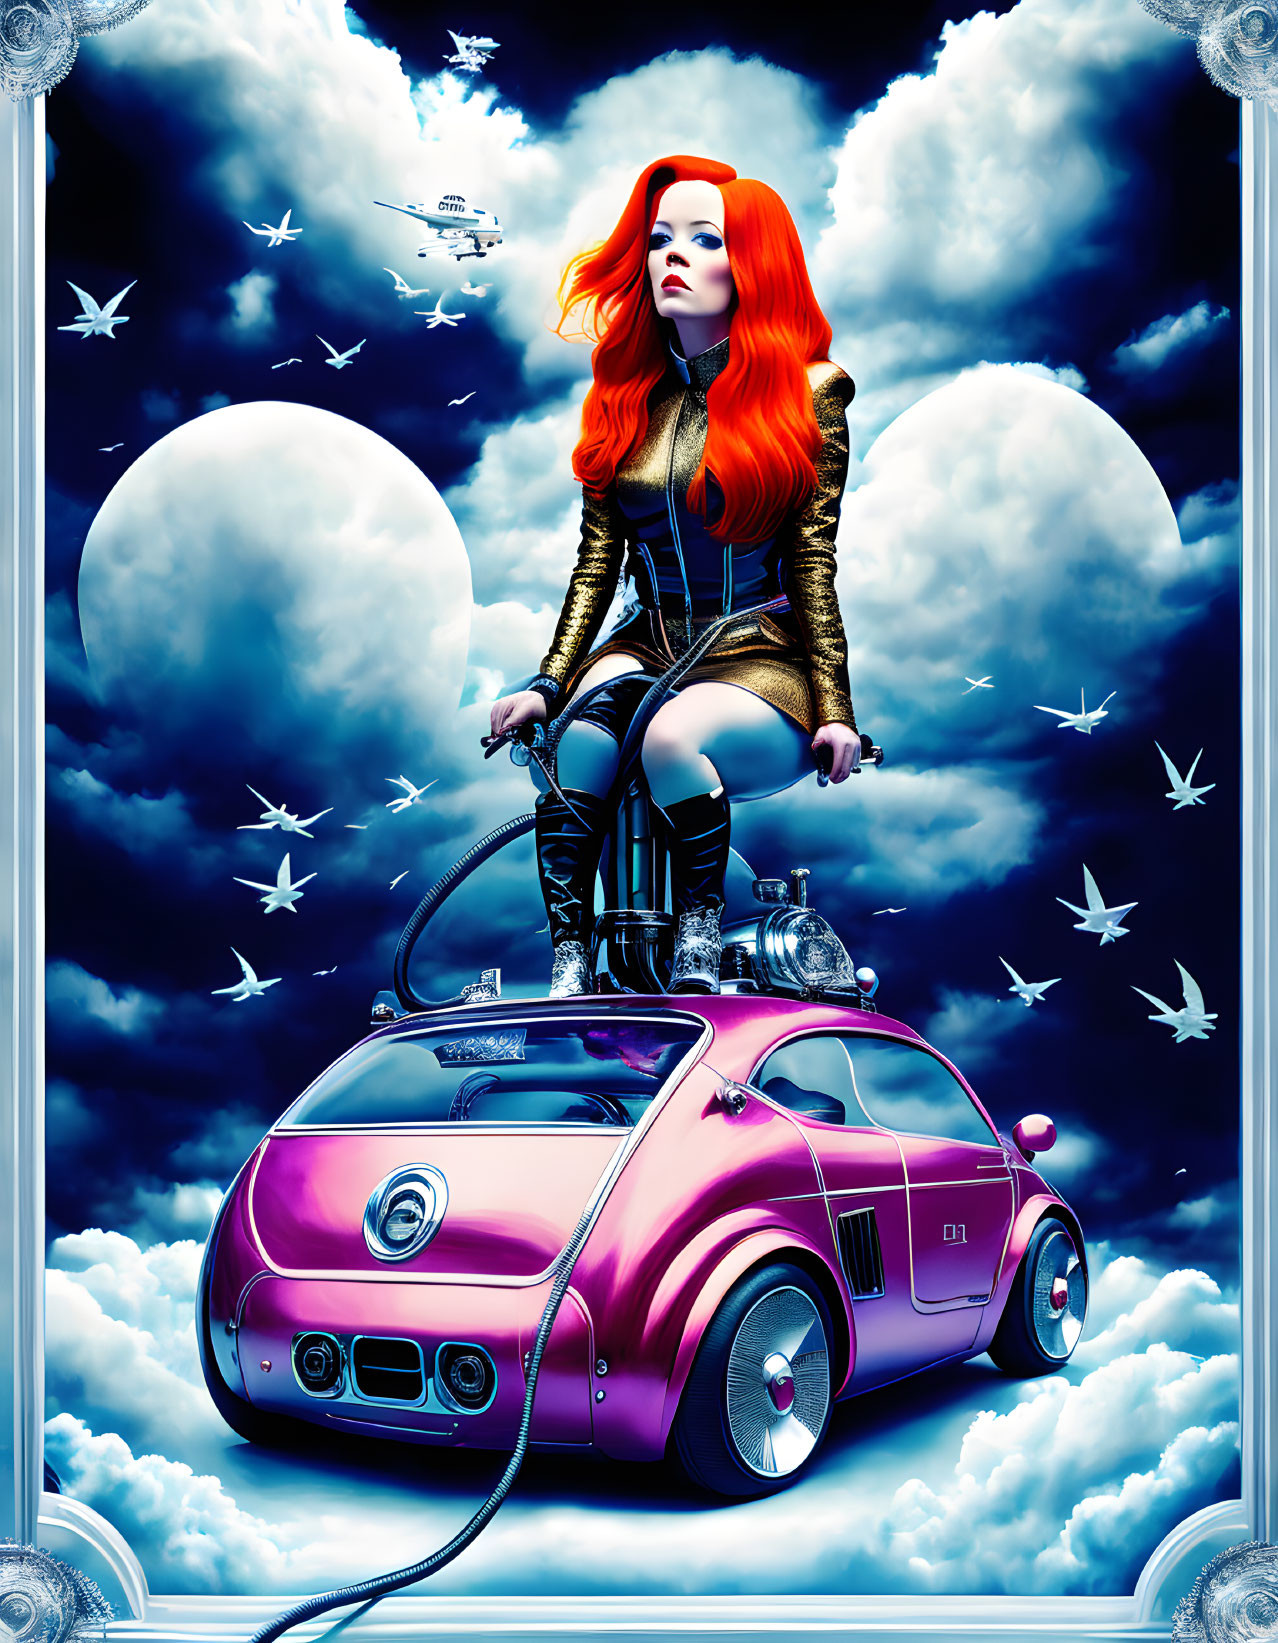 Vibrant red-haired woman on pink car in sky with birds